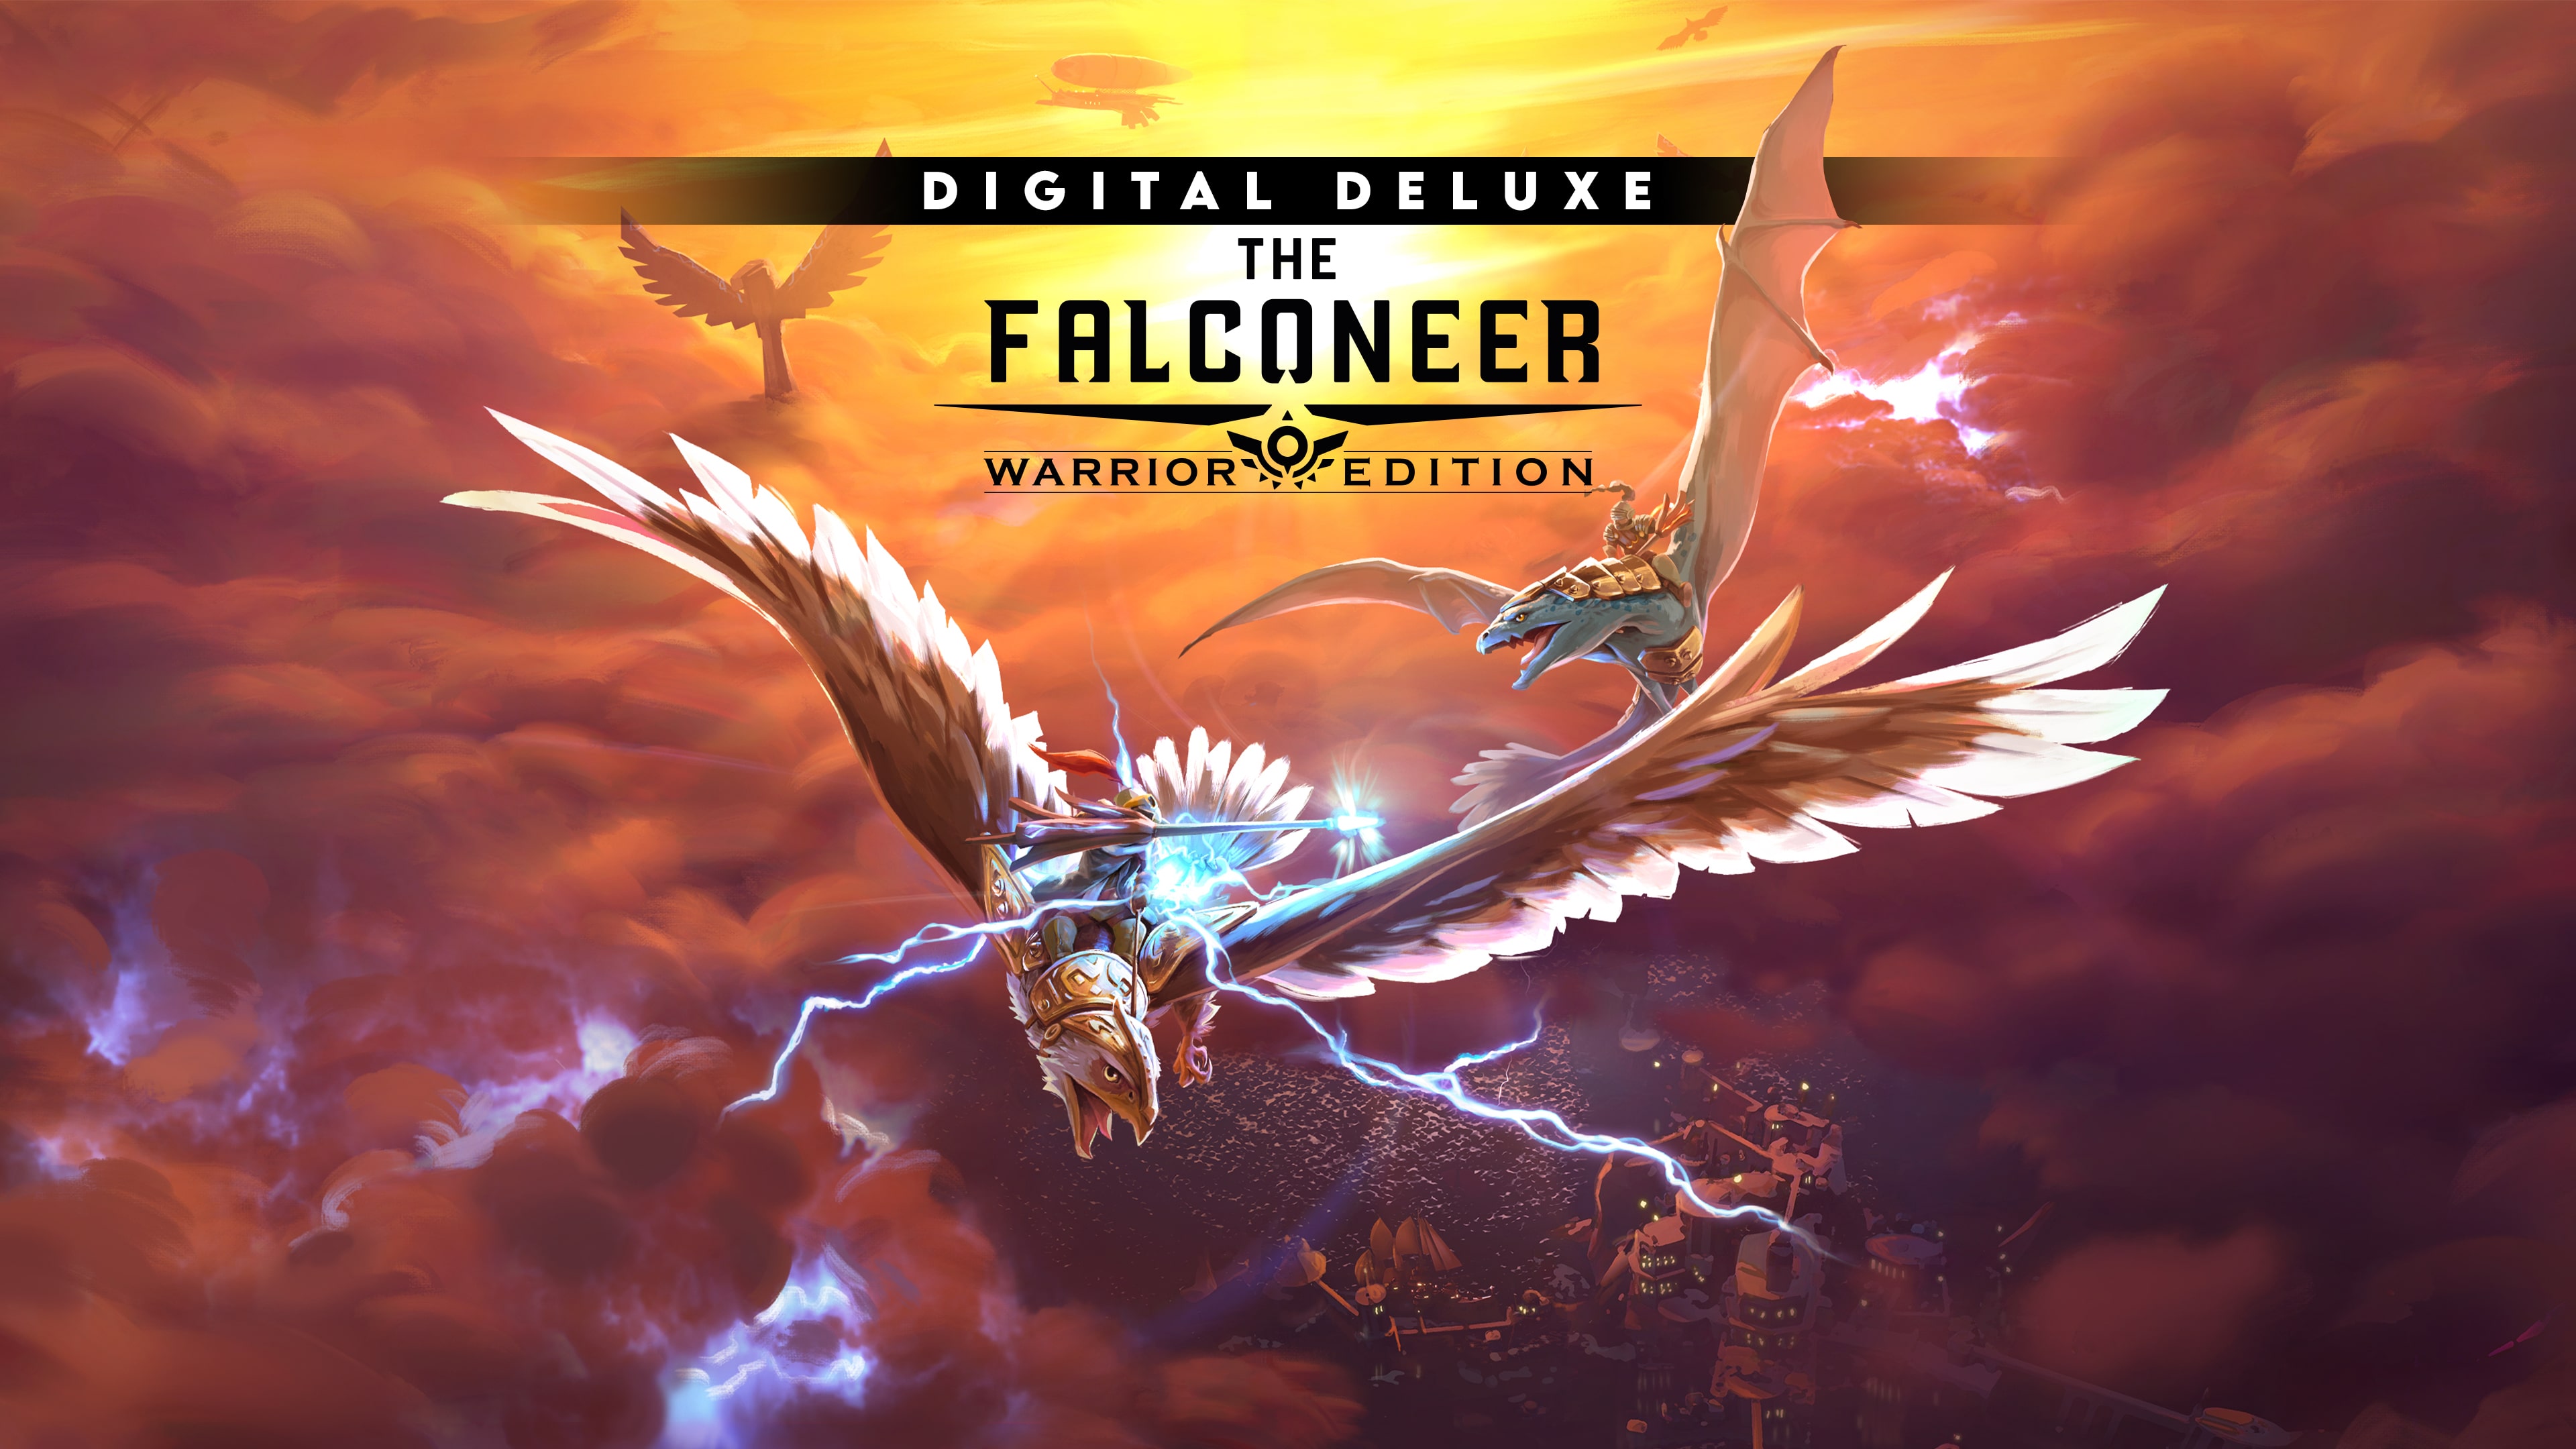 The Falconeer: Warrior Edition (Simplified Chinese, English, Korean, Traditional Chinese)